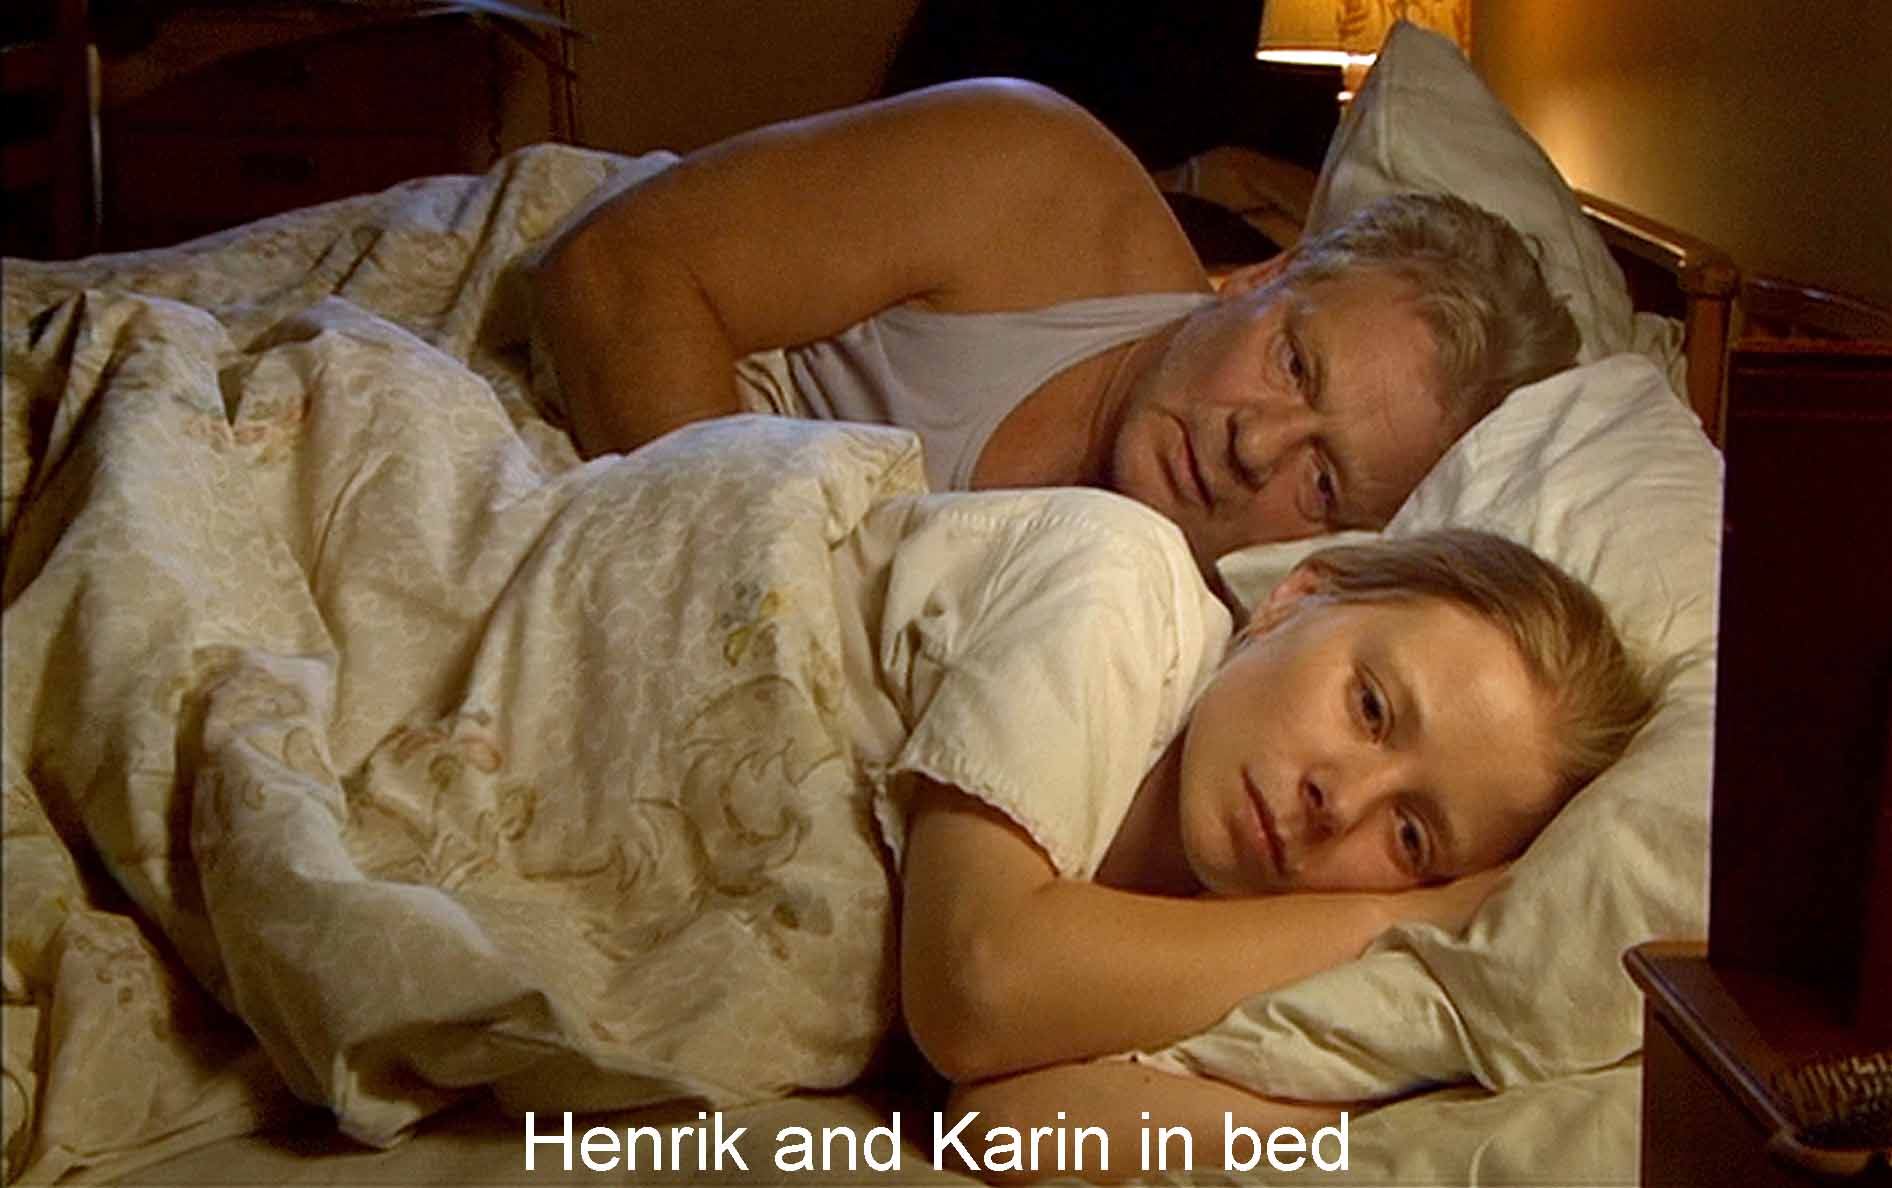 Henrik and Karin in bed